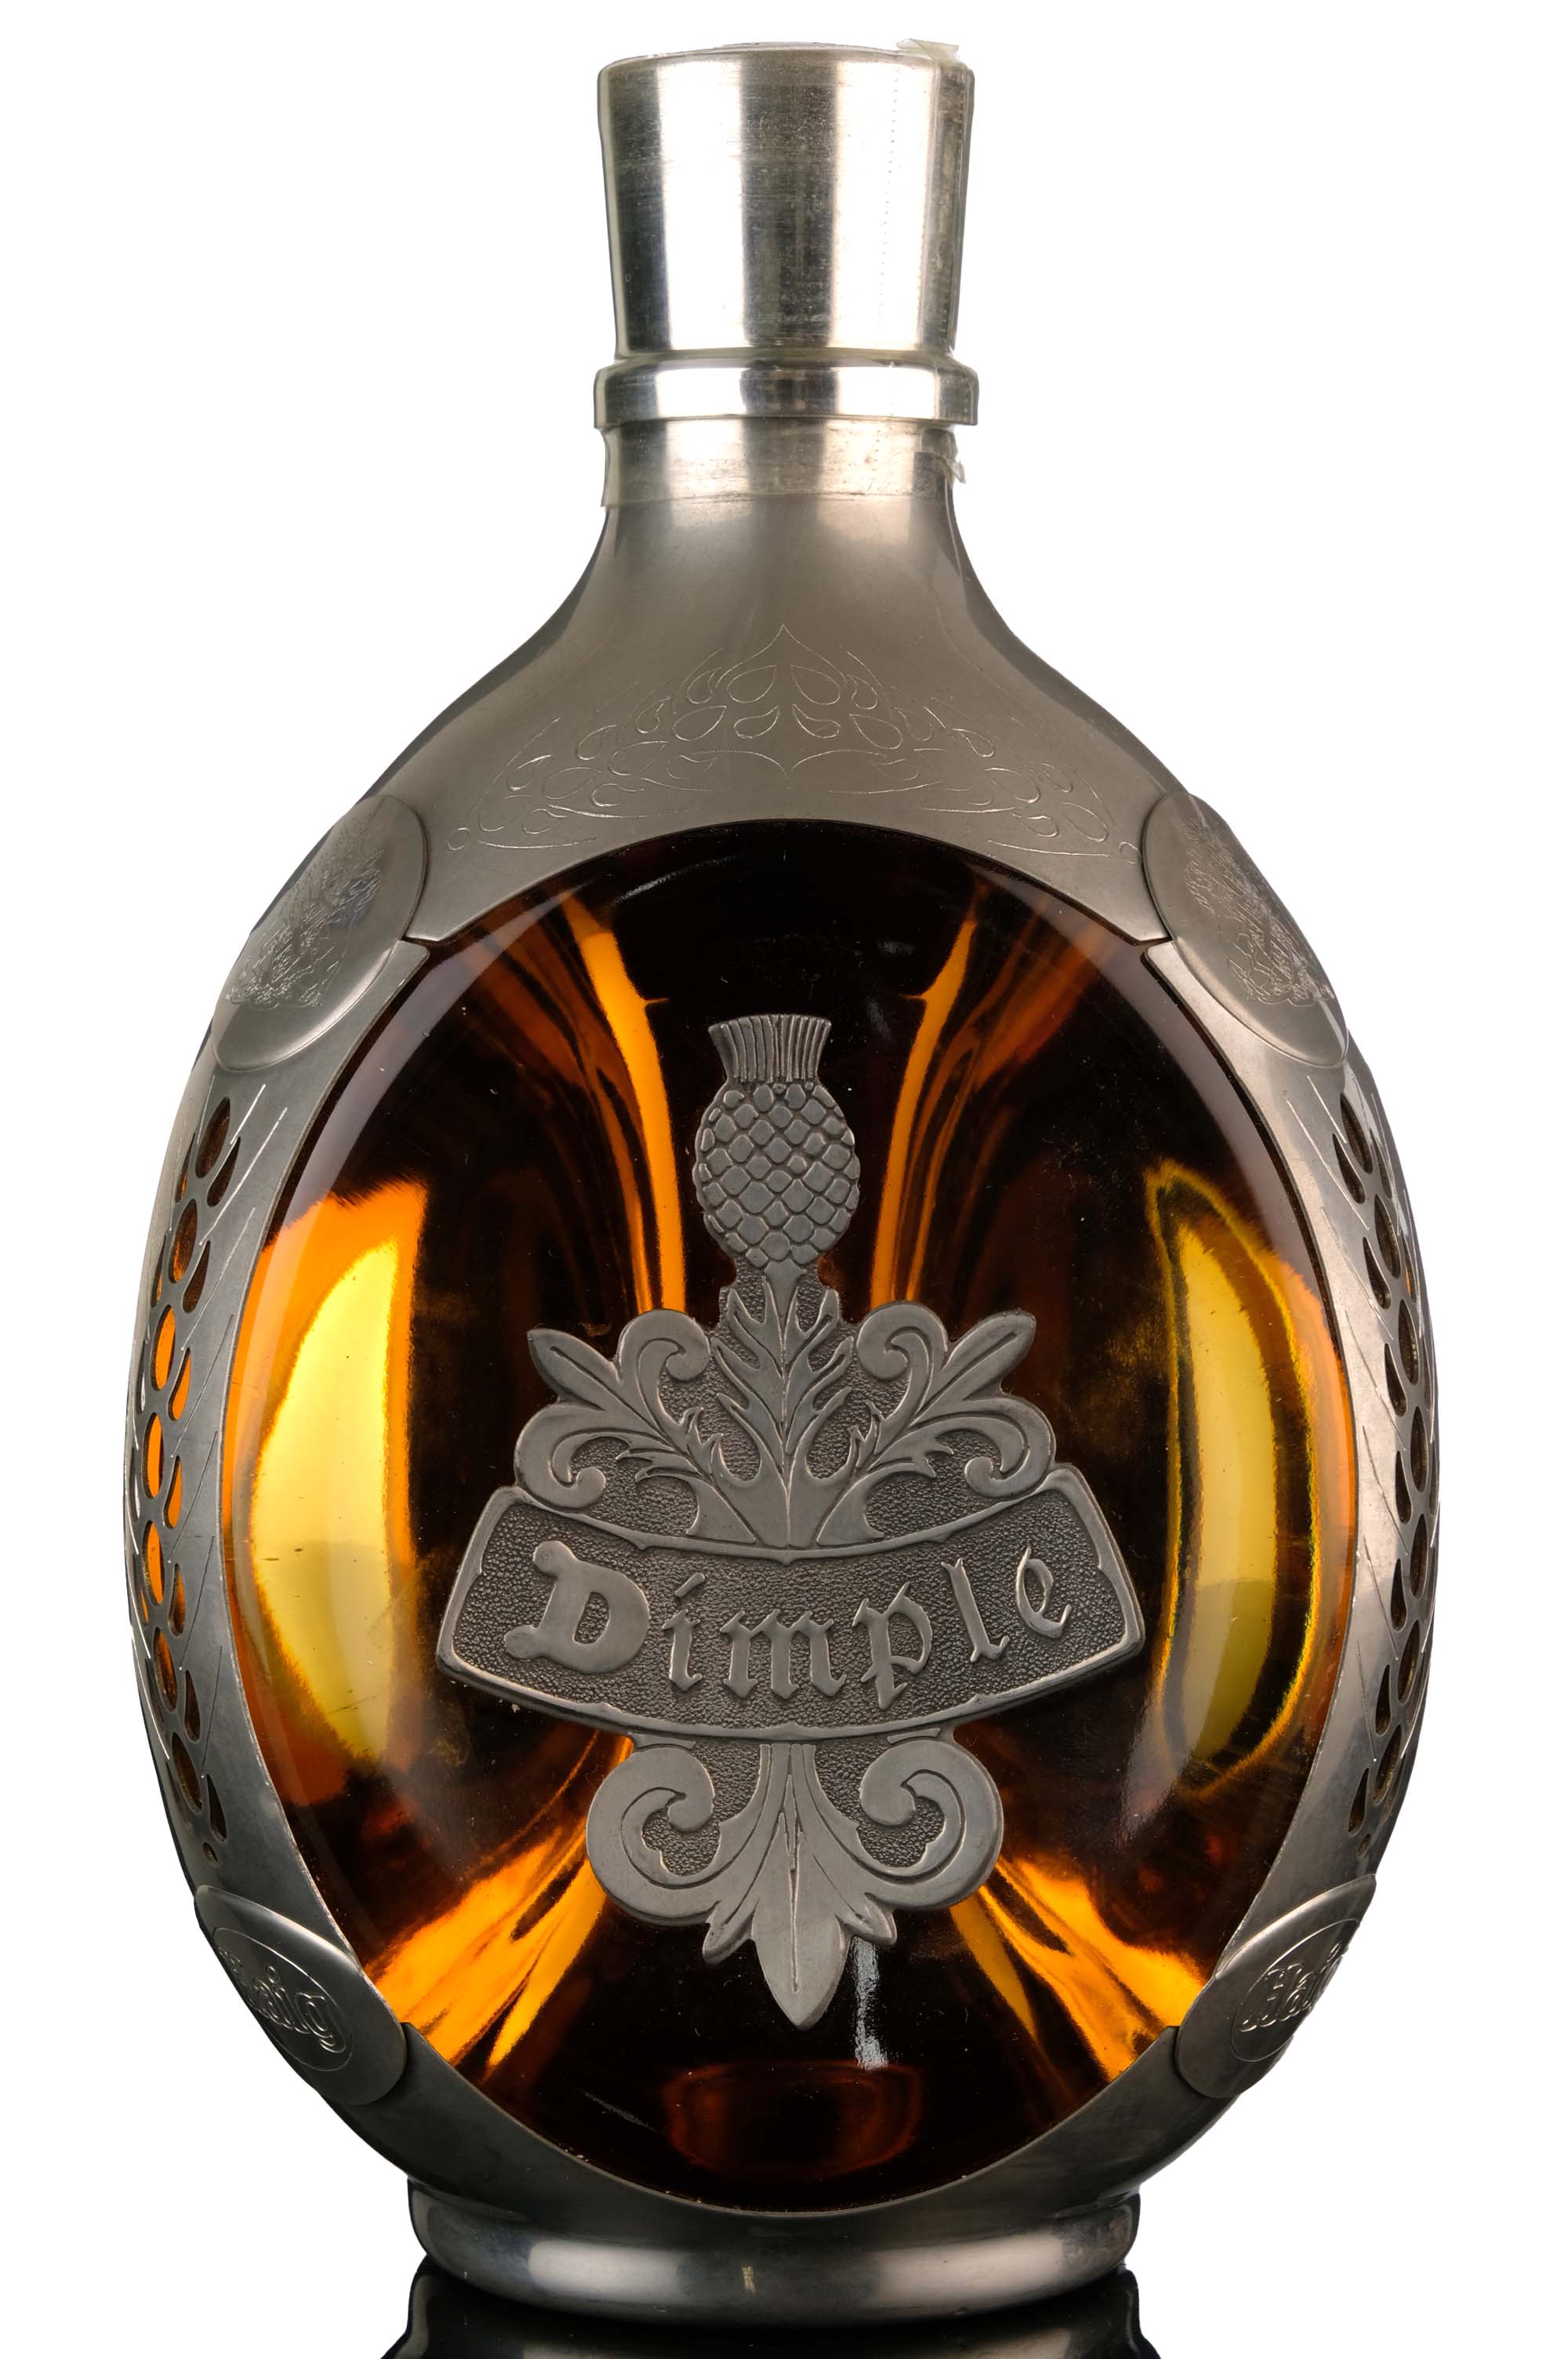 Dimple 12 Year Old - Royal Pewter Decanter